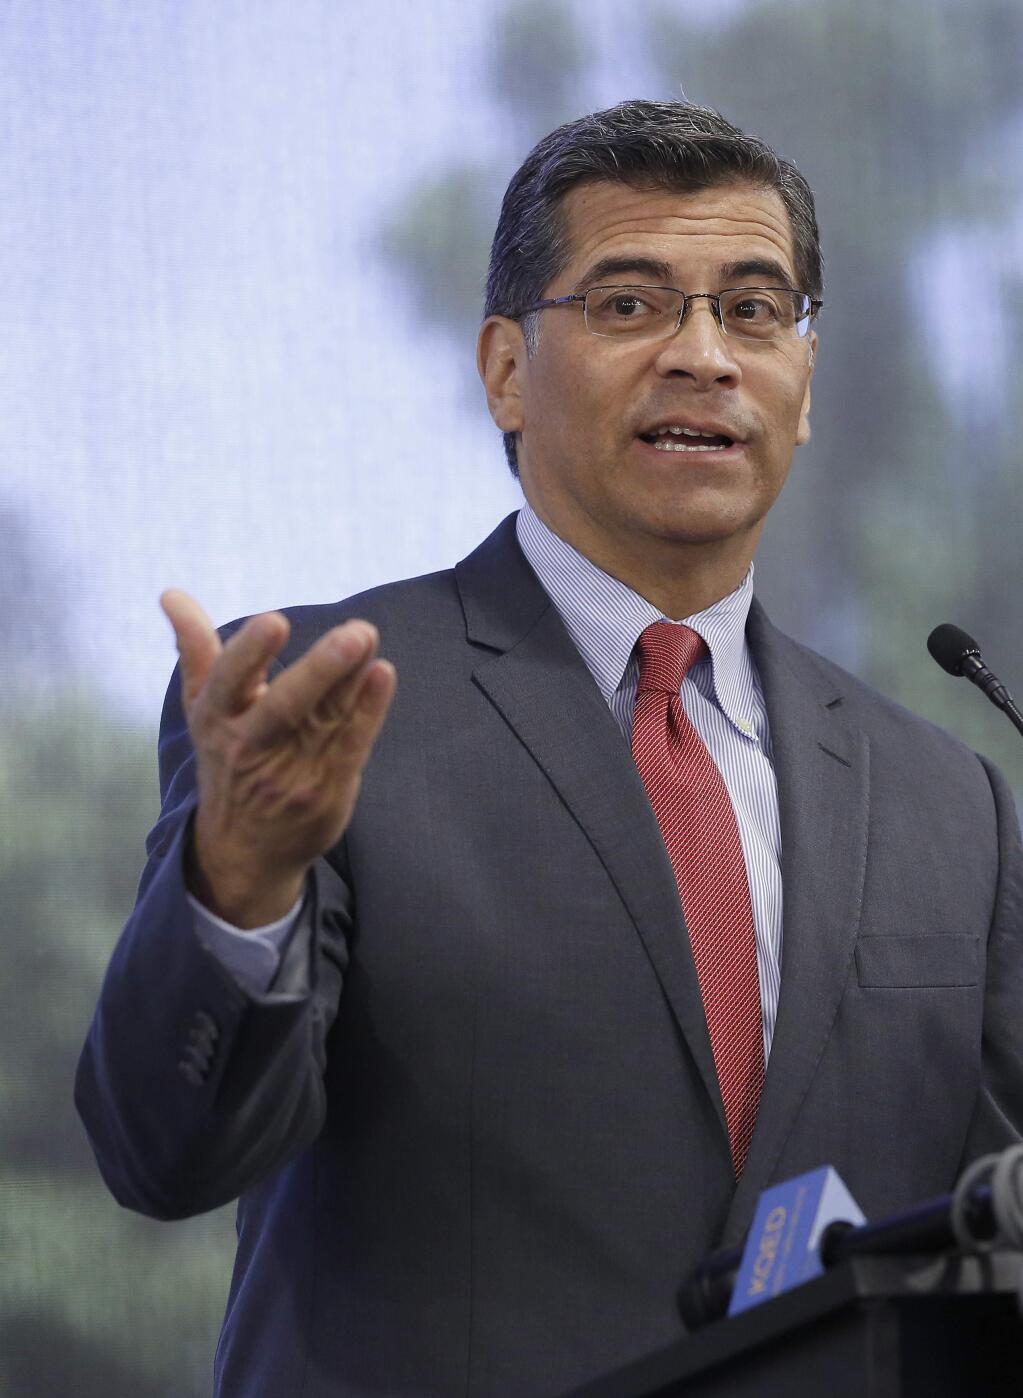 California Attorney General Xavier Becerra criticized U.S. Attorney General Jeff Sessions recent announcement calling for a renewed crack down on criminals as 'crazy' and 'stupid' while speaking at the Sacramento Press Club, Monday, May 15, 2017,in Sacramento, Calif. Sessions said that federal prosecutors should file the toughest charges possible against most crime suspects, which critics say is a throwback to what they call a failed war on drugs. (AP Photo/Rich Pedroncelli)